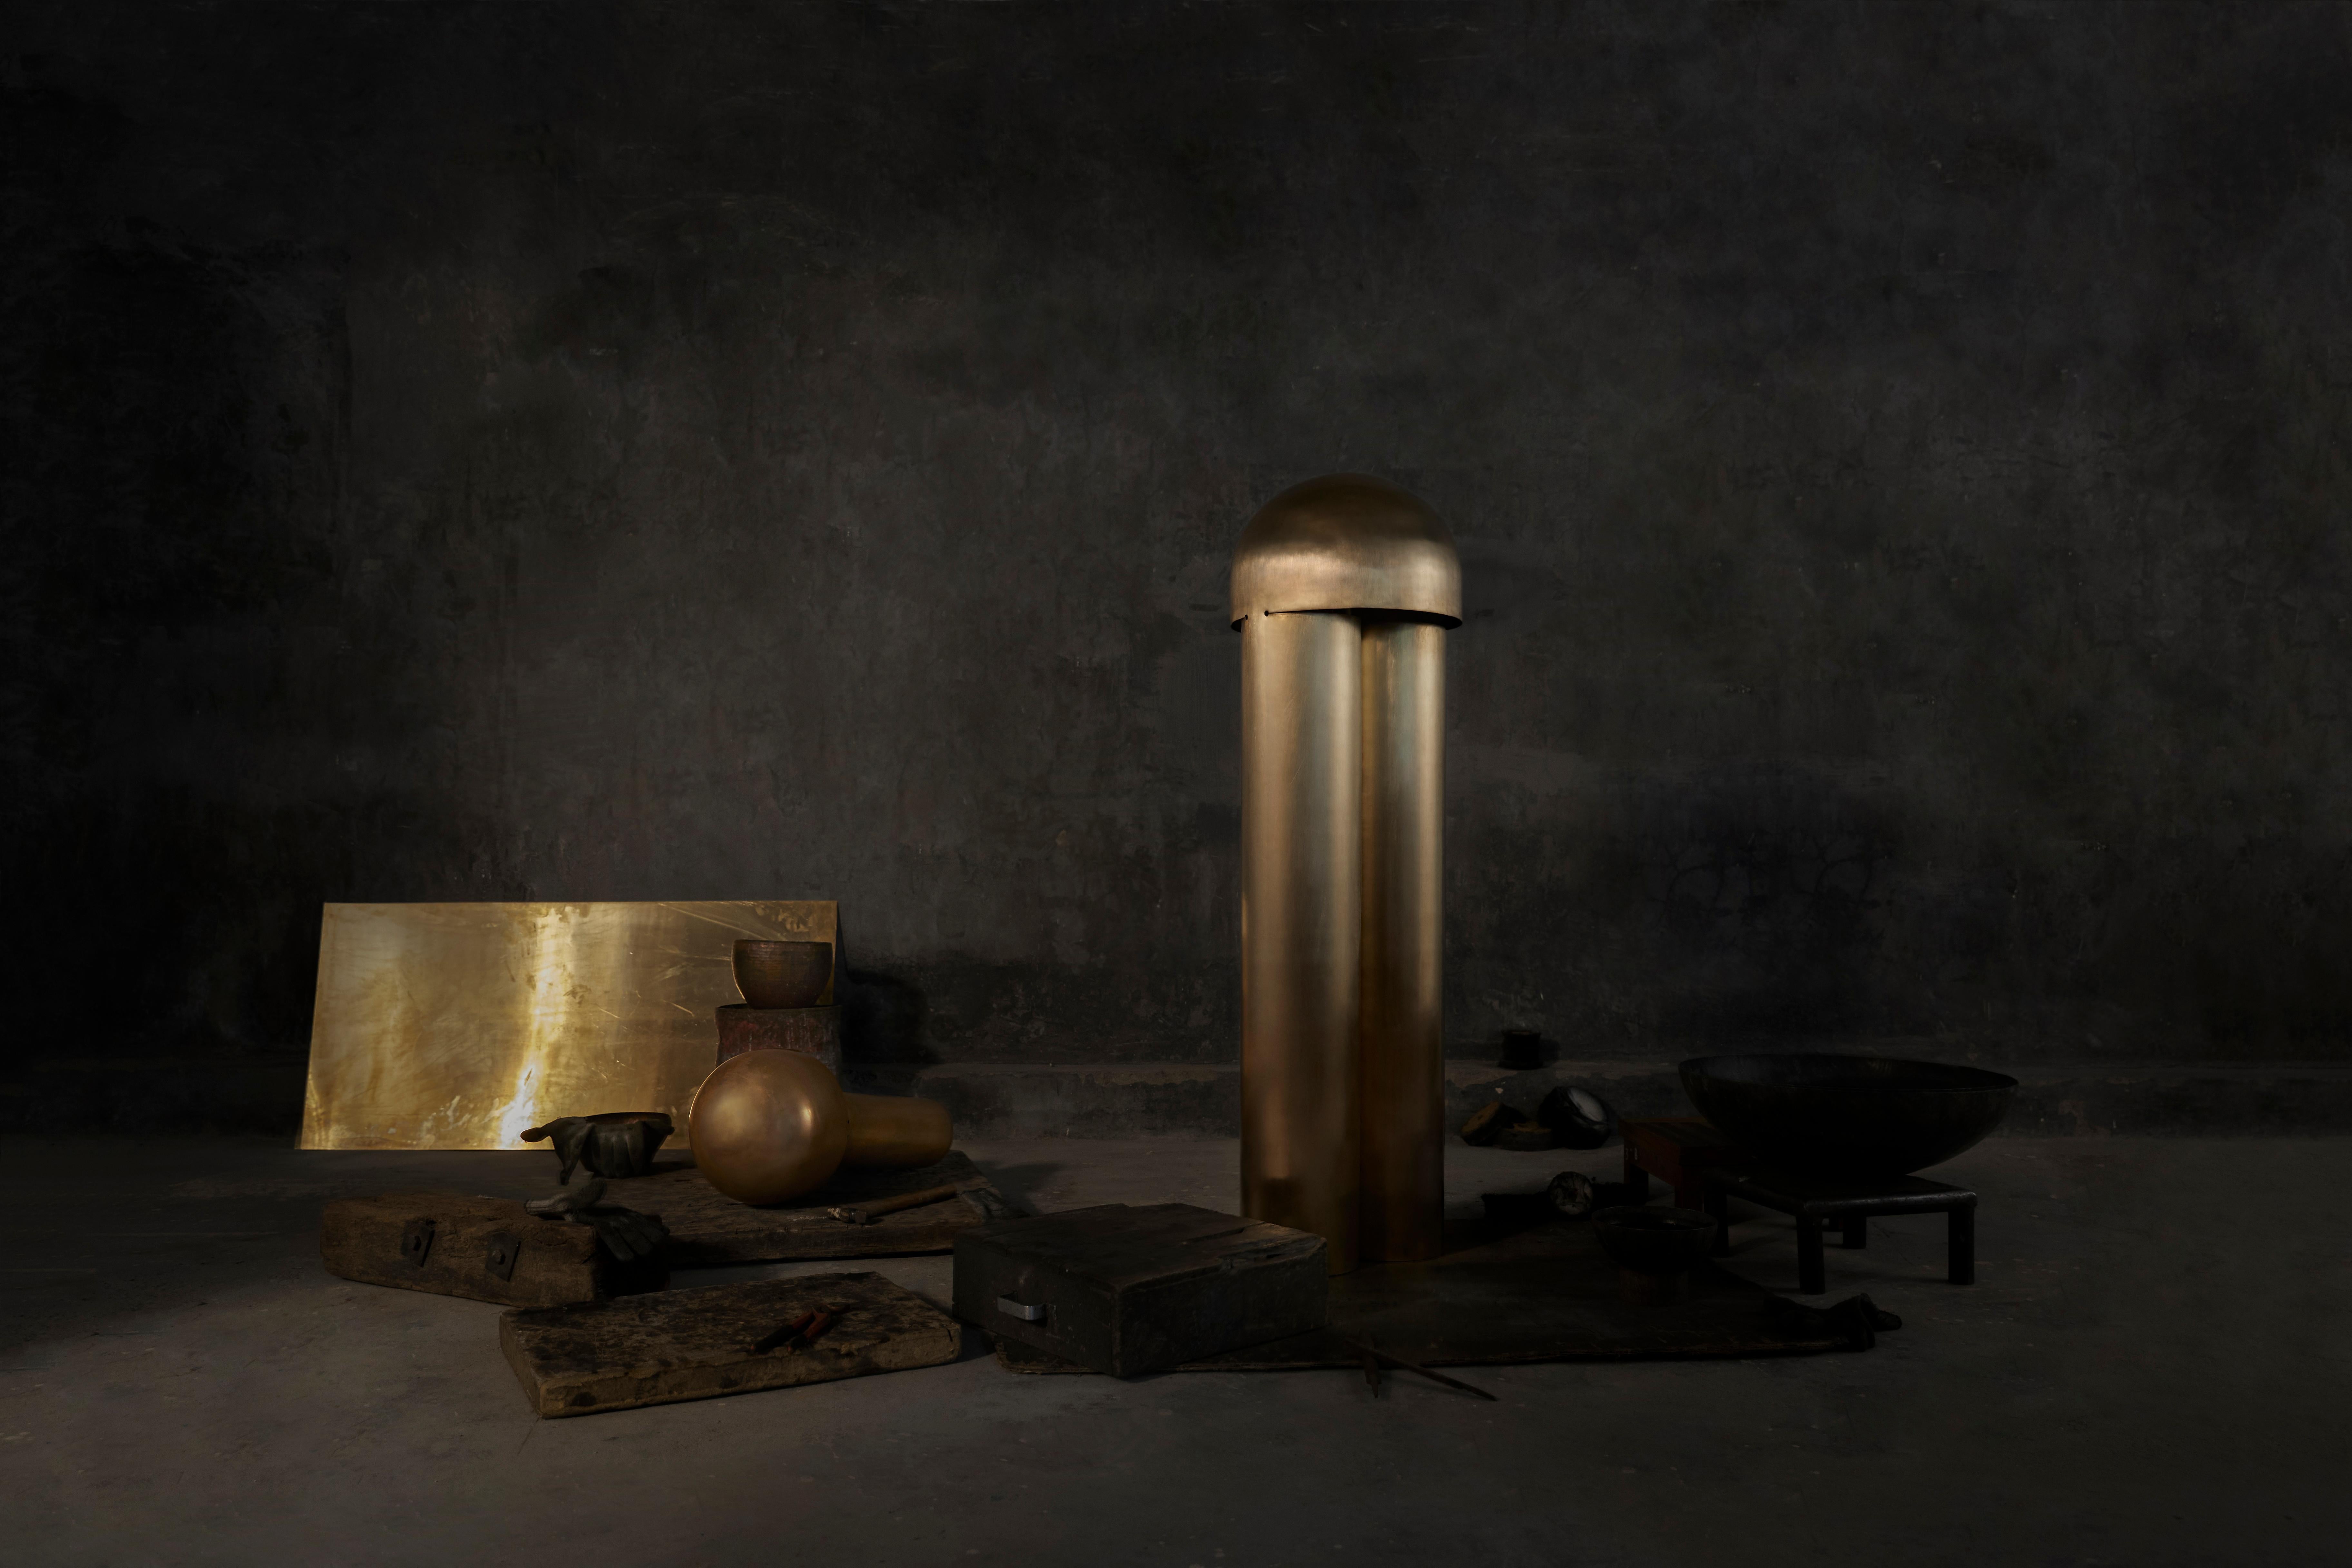 Monolith brass sculpted table lamp by Paul matter.
Dimensions: H 419 mm x D 203.2 mm.
Weight: 3 Kgs
Lamping: 1 type E14 base, 3W - 5W led, warm white.
CE certified, voltage 220V - 240V.
Dimmable upon request.
Materials: Brass

Custom